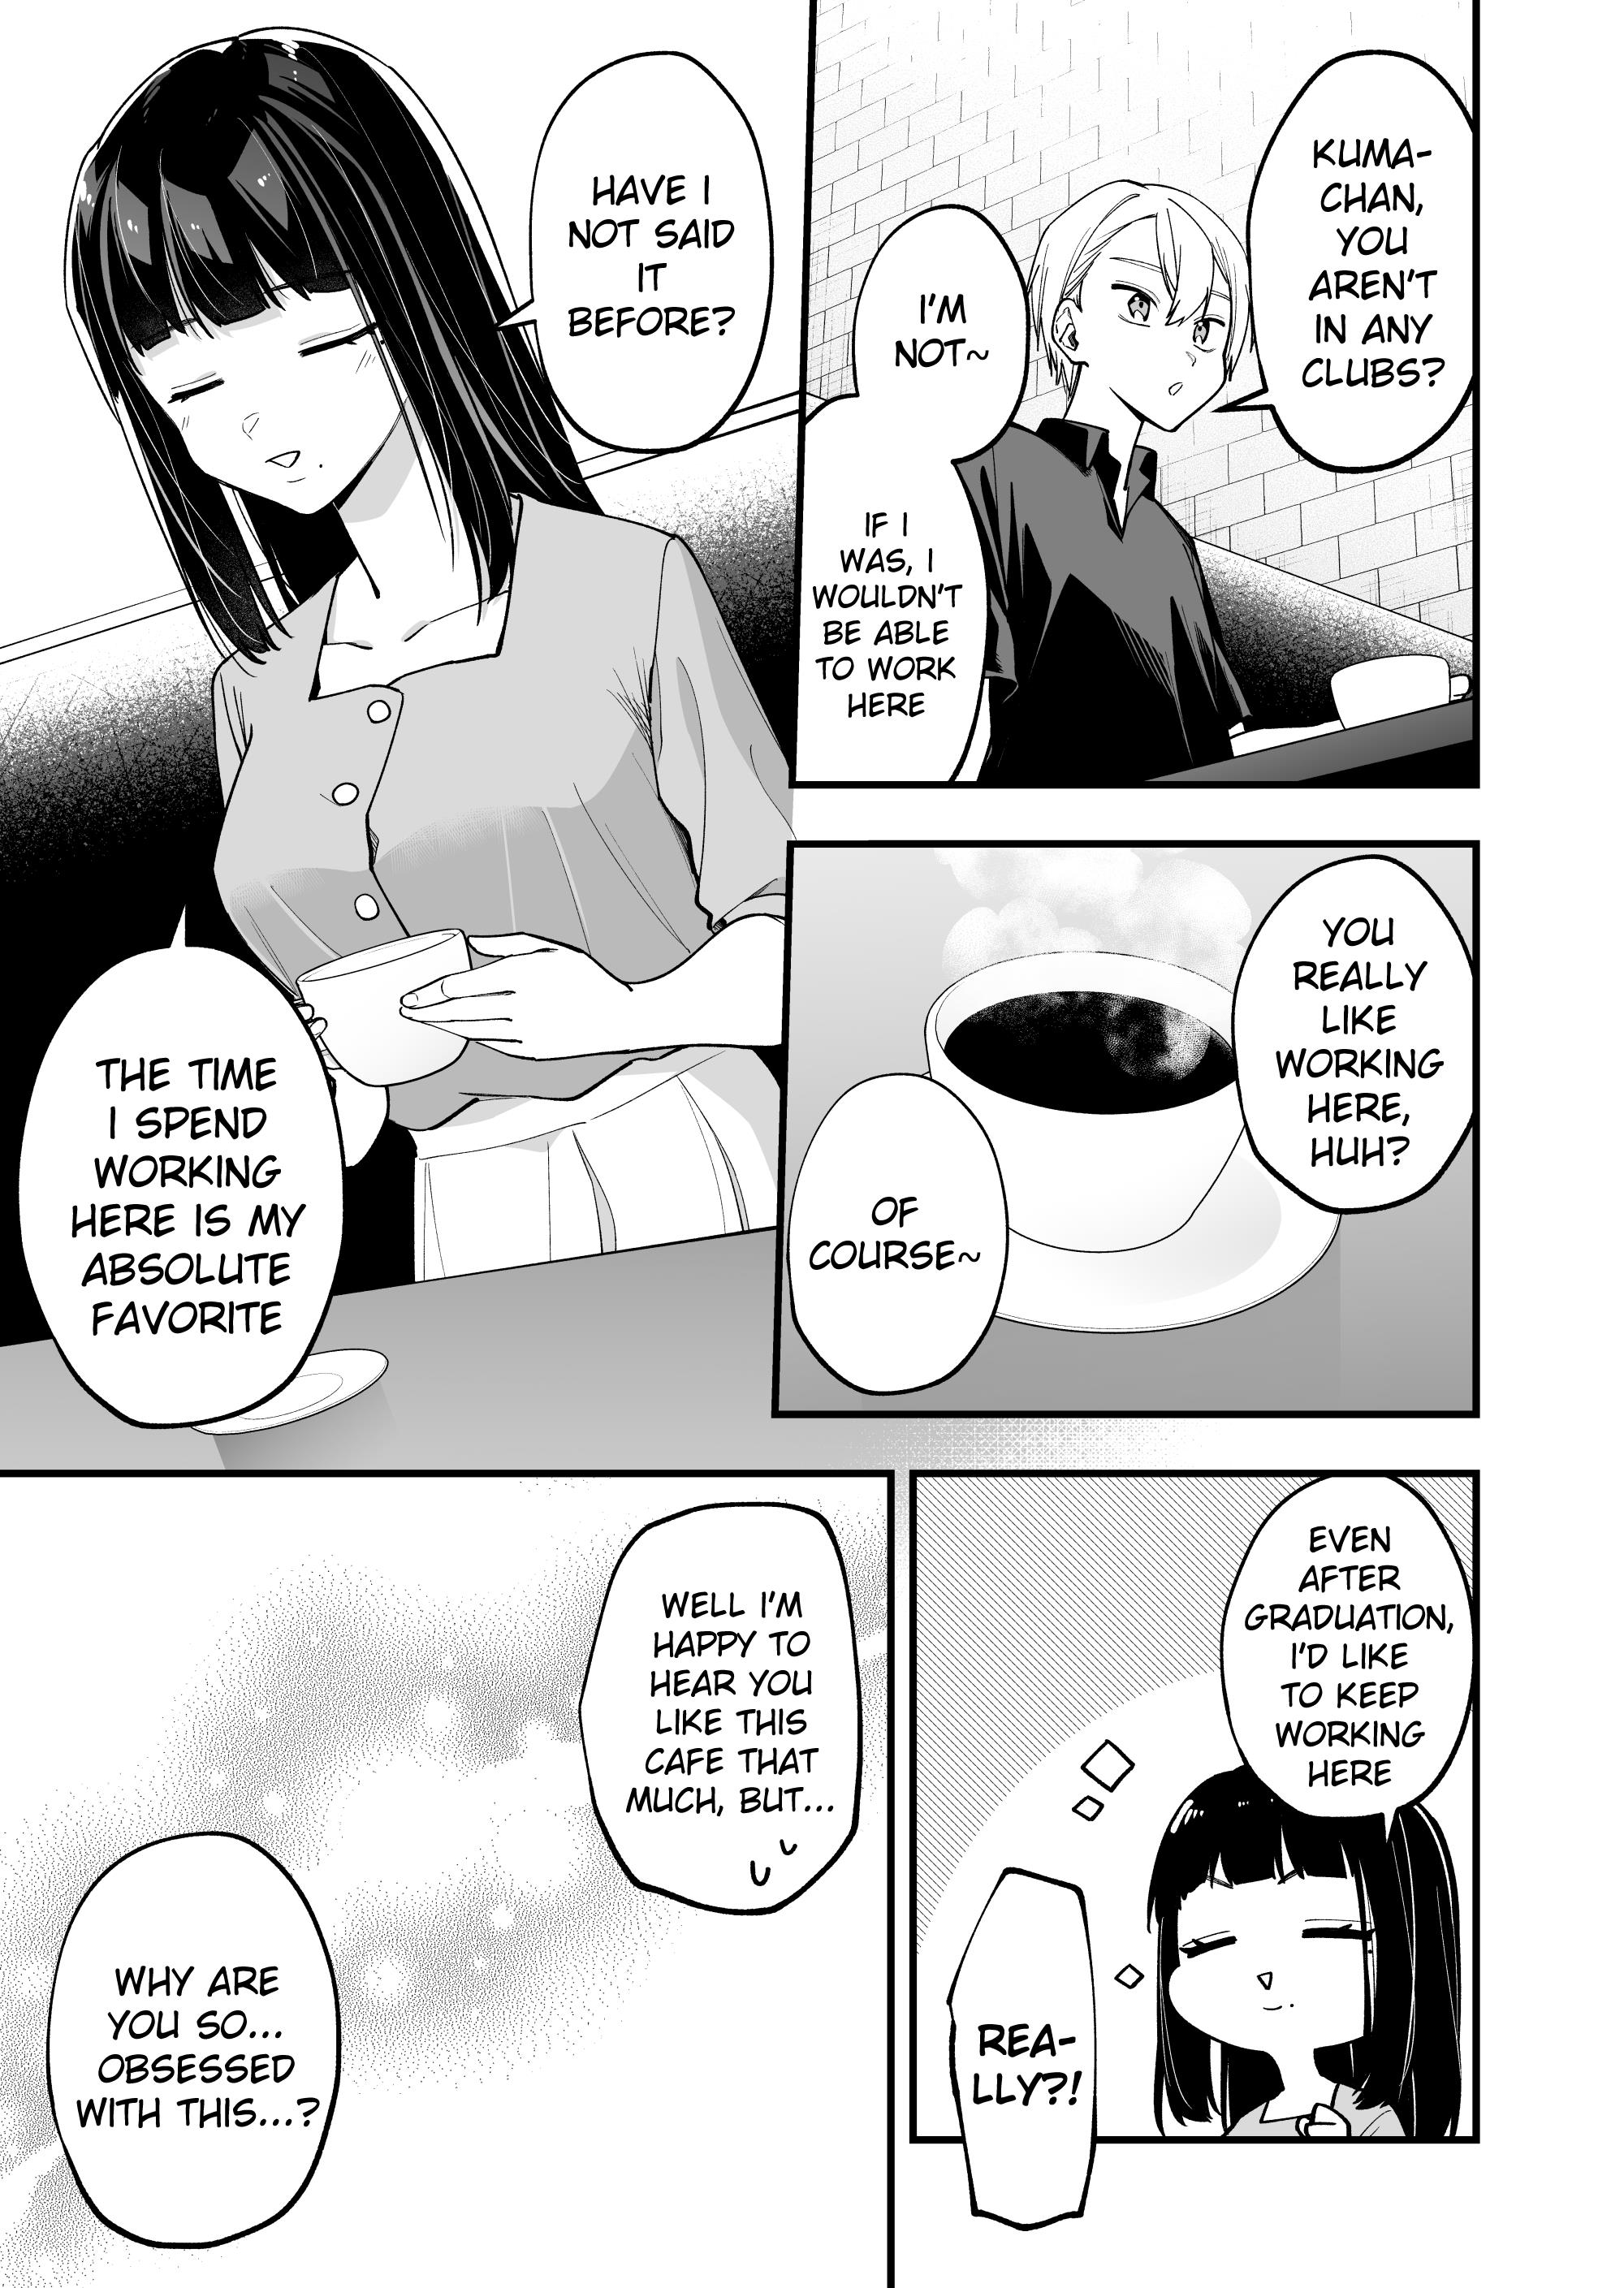 The Manager And The Oblivious Waitress - Page 3